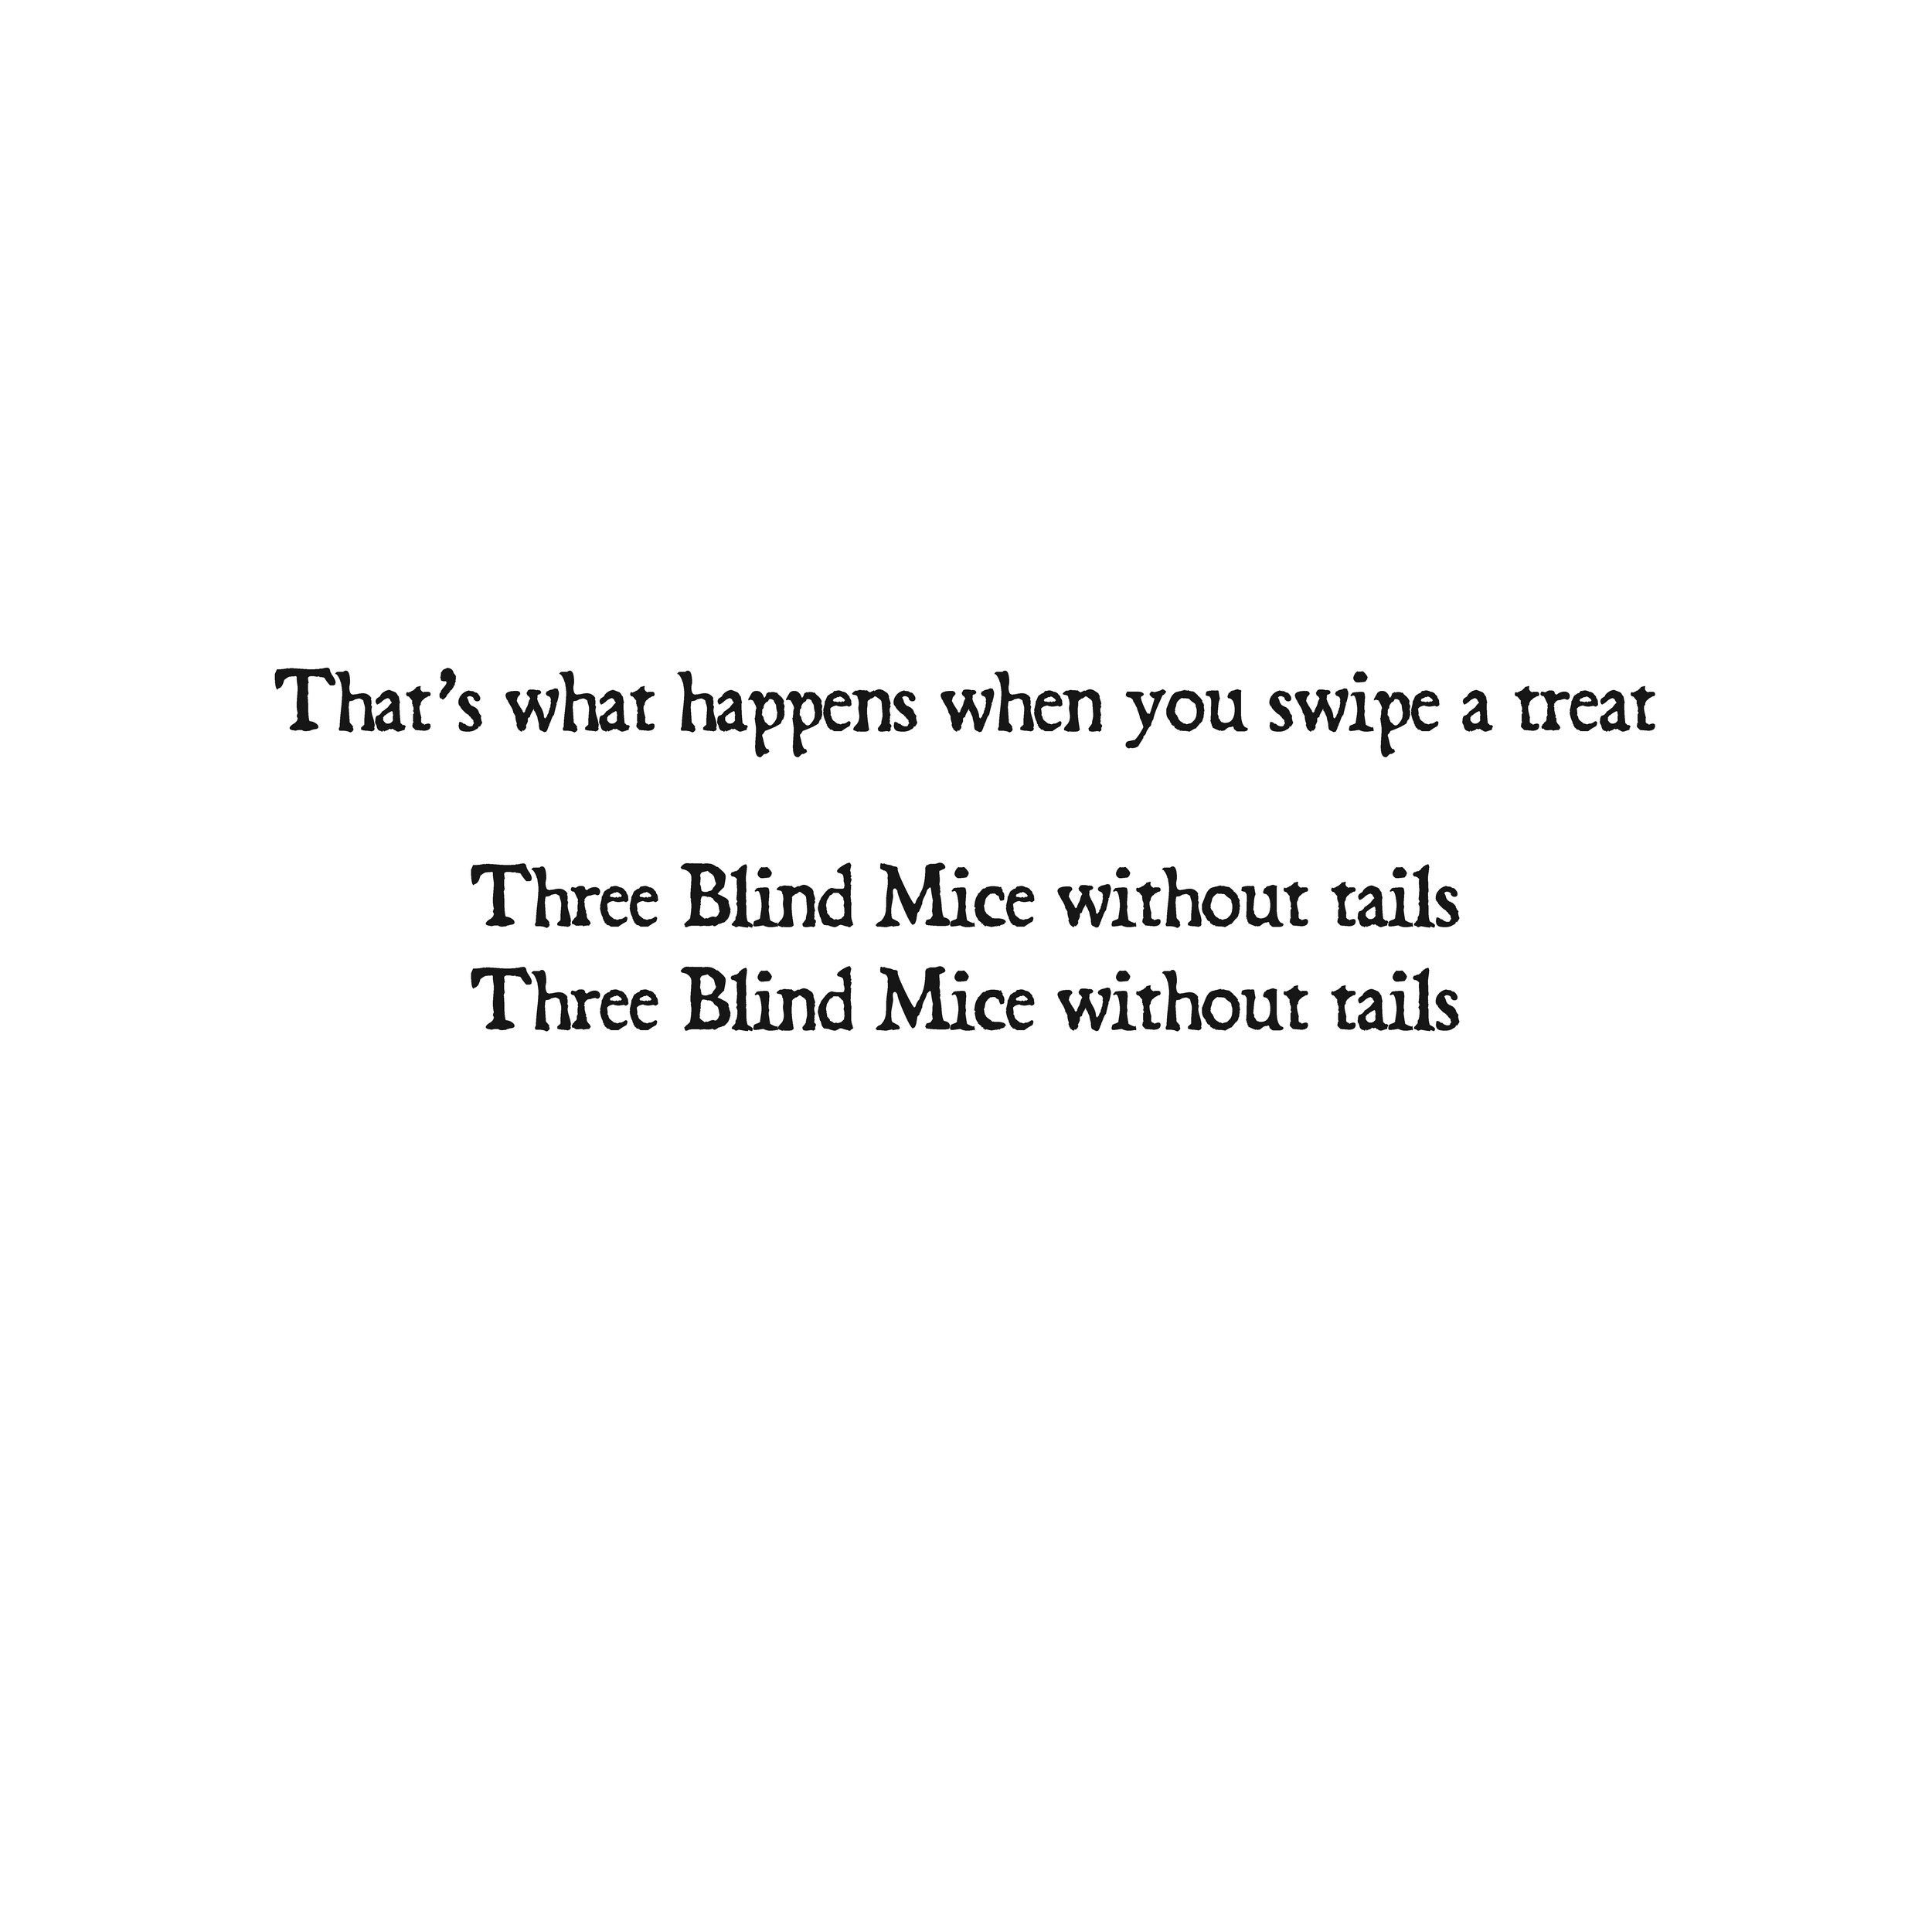 Three Blind Mice Book-161130_Page_18.png